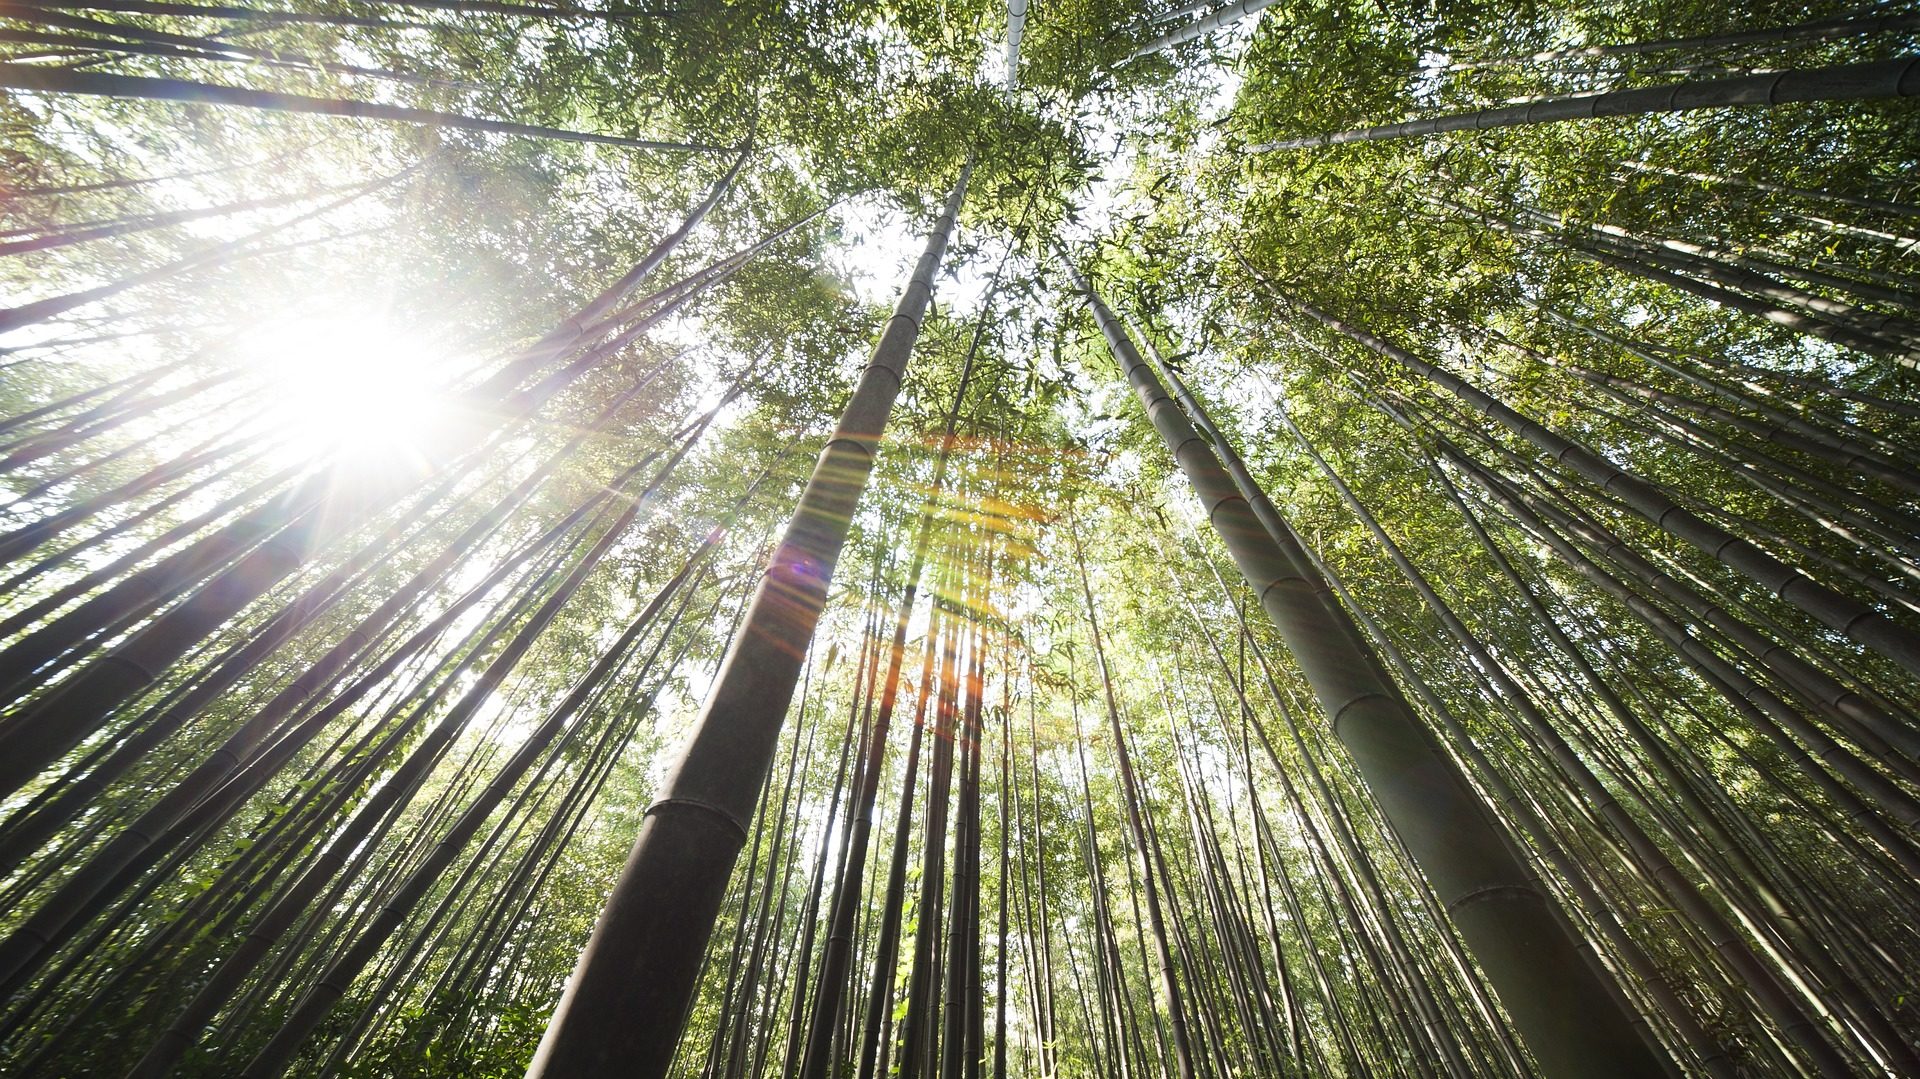 Sustainable rural development and climate action with bamboo